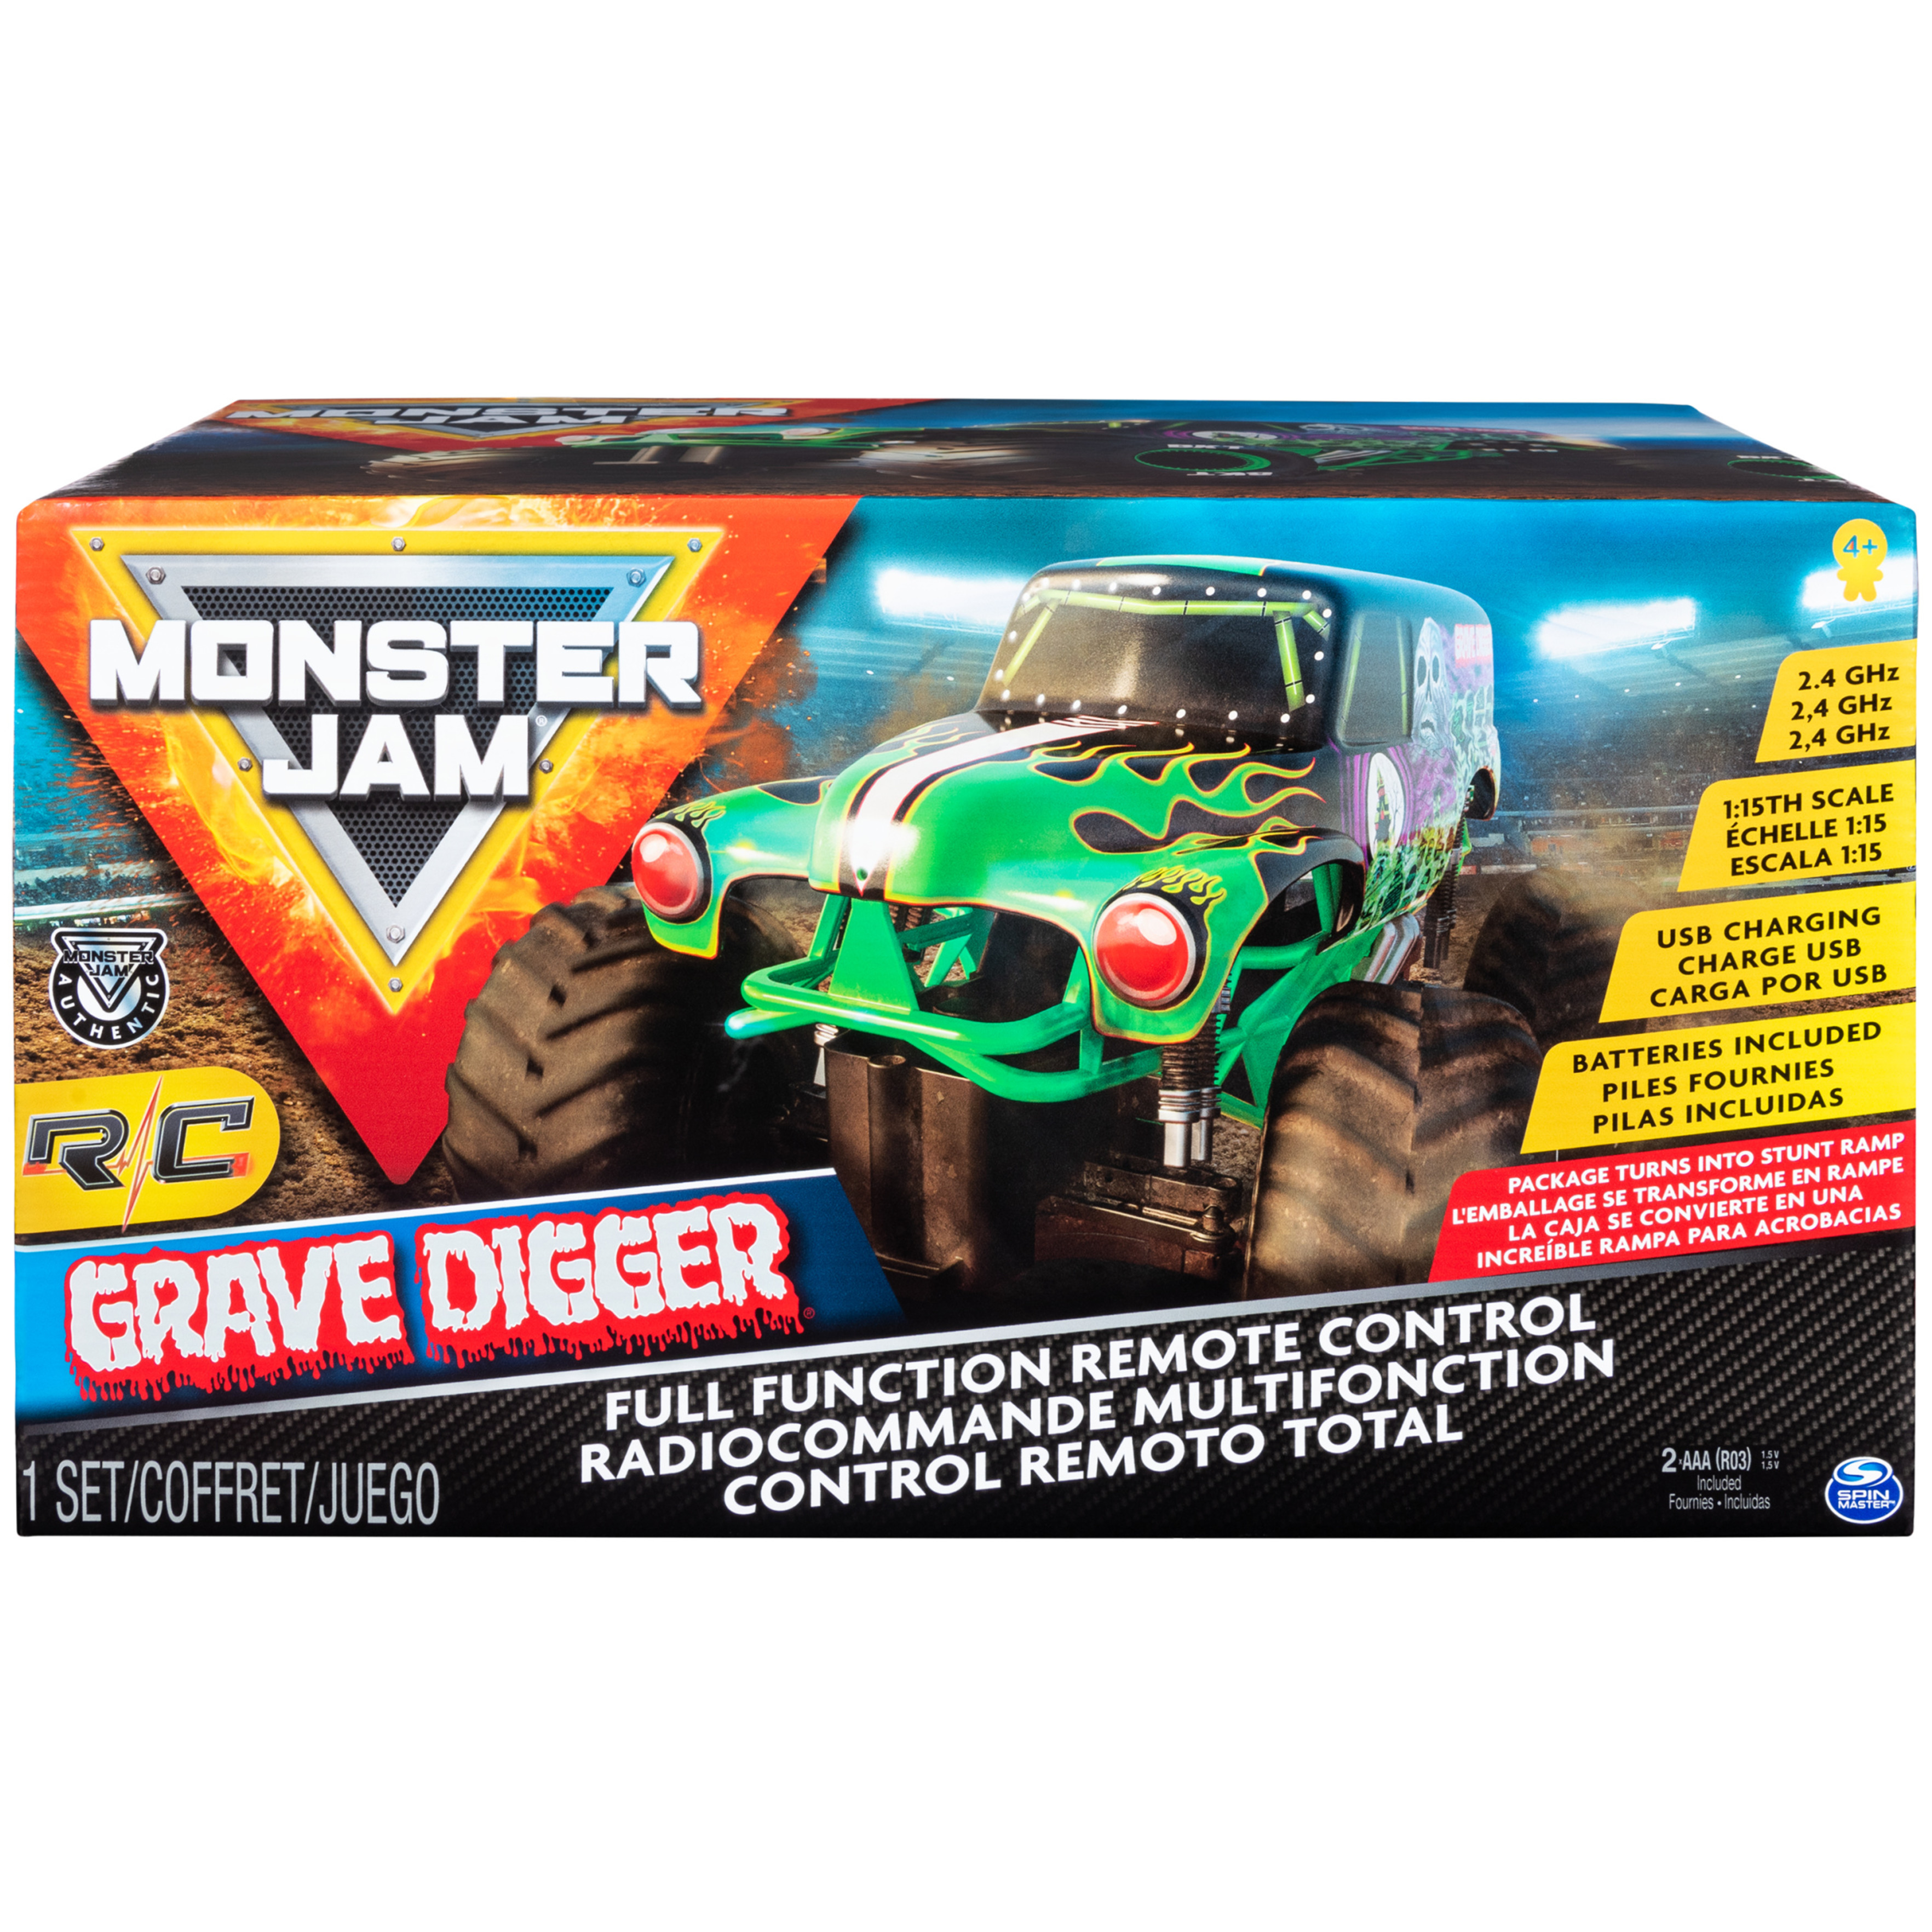 Monster Jam, Official Grave Digger Remote Control Truck  1:15 Scale, 2.4GHz - image 3 of 9